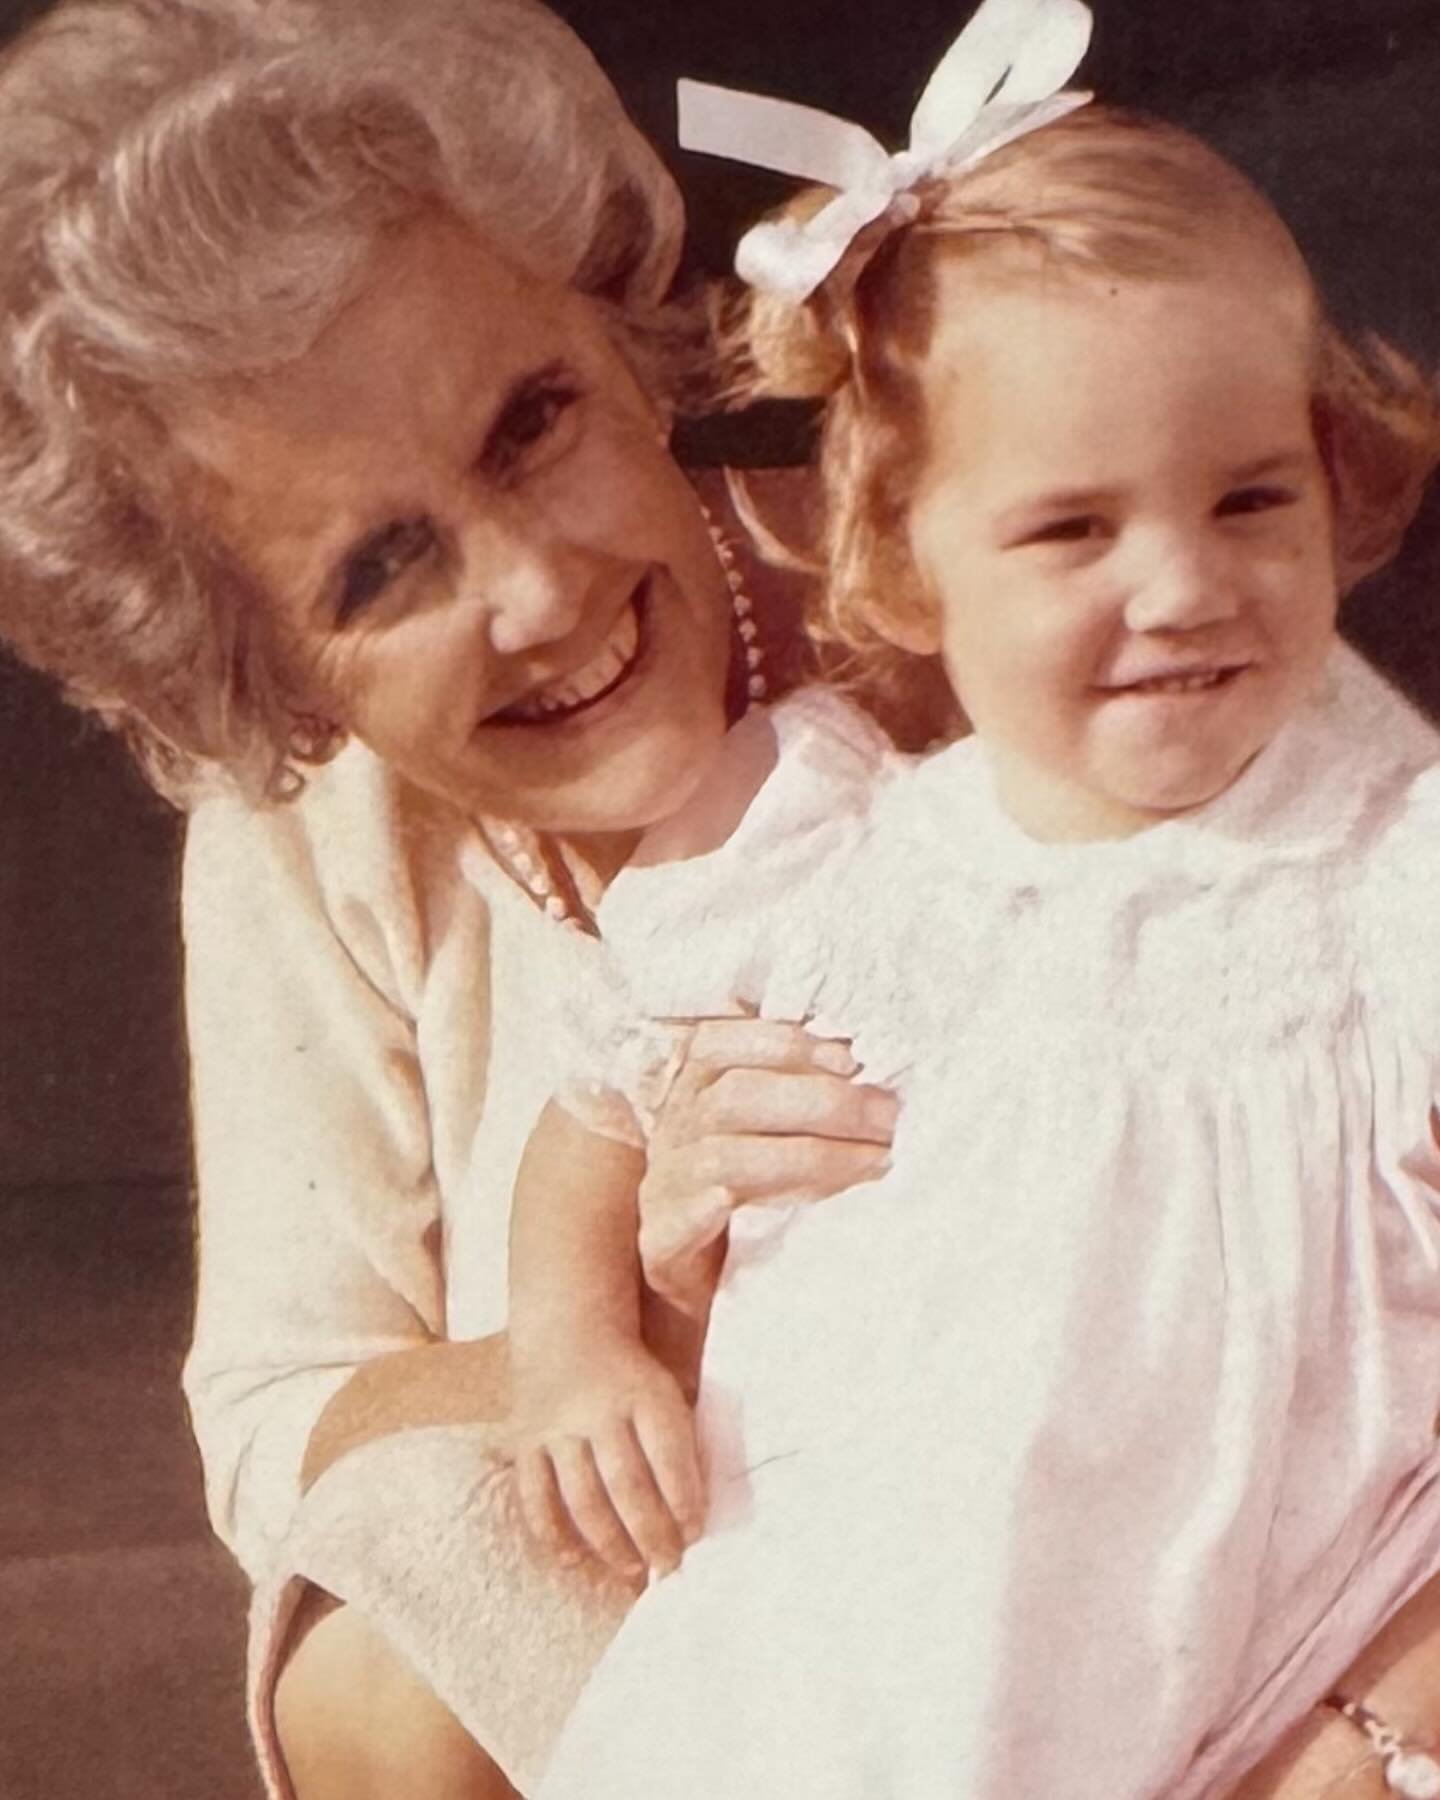 I stumbled upon this old photo of me with my maternal grandmother Emily Joubert, while looking for a picture to post of my Mom. This was taken at our house on Tiffany Way&hellip; I always felt her love and support.